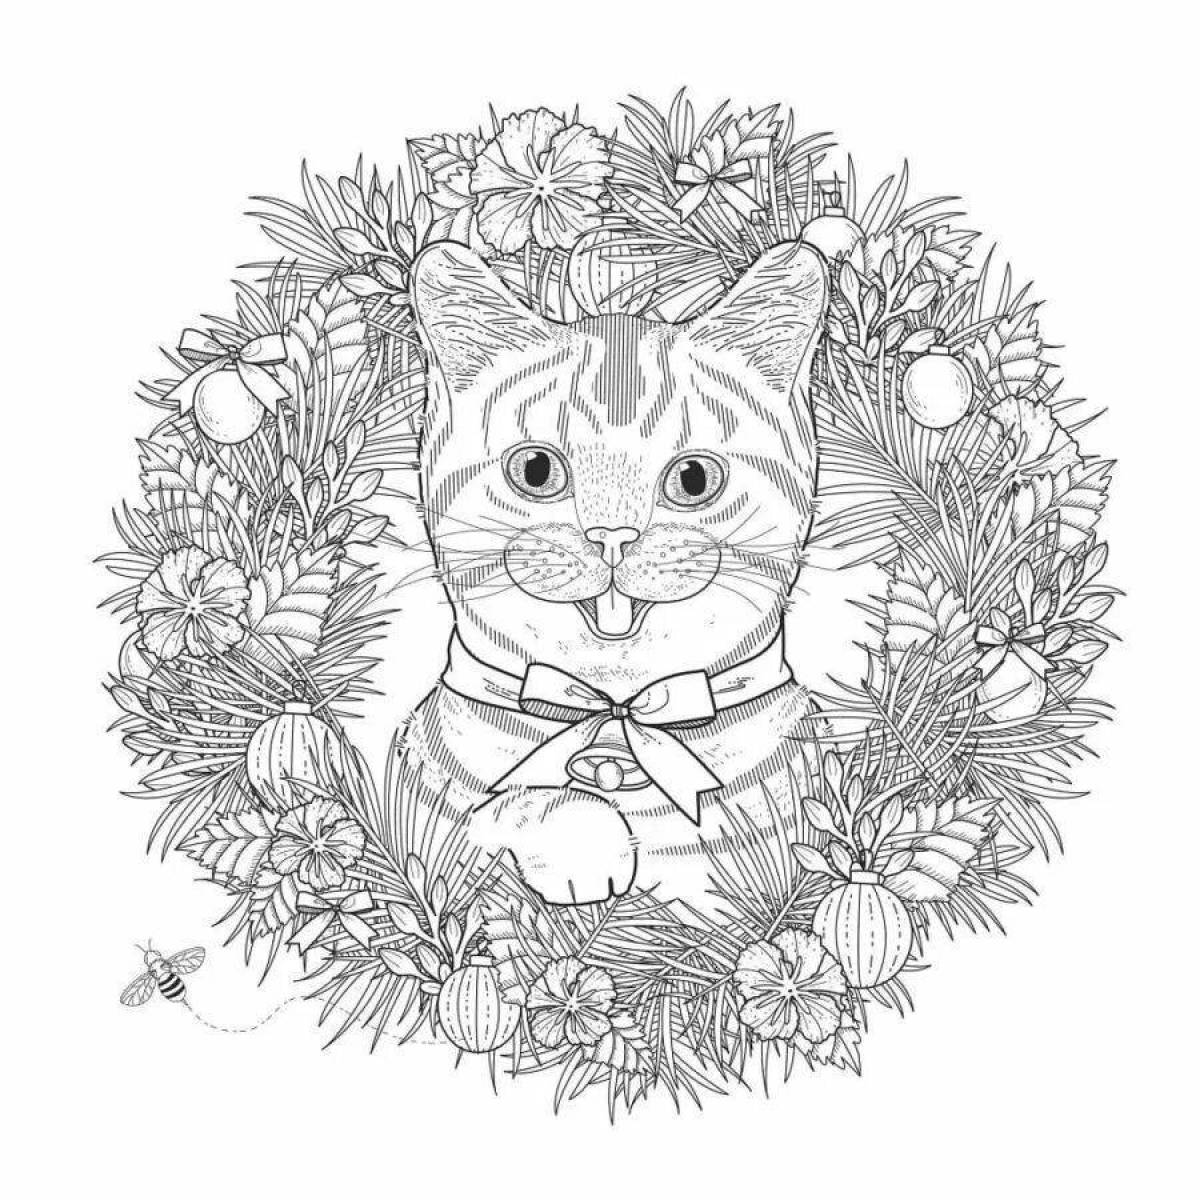 Merry Christmas coloring kitty